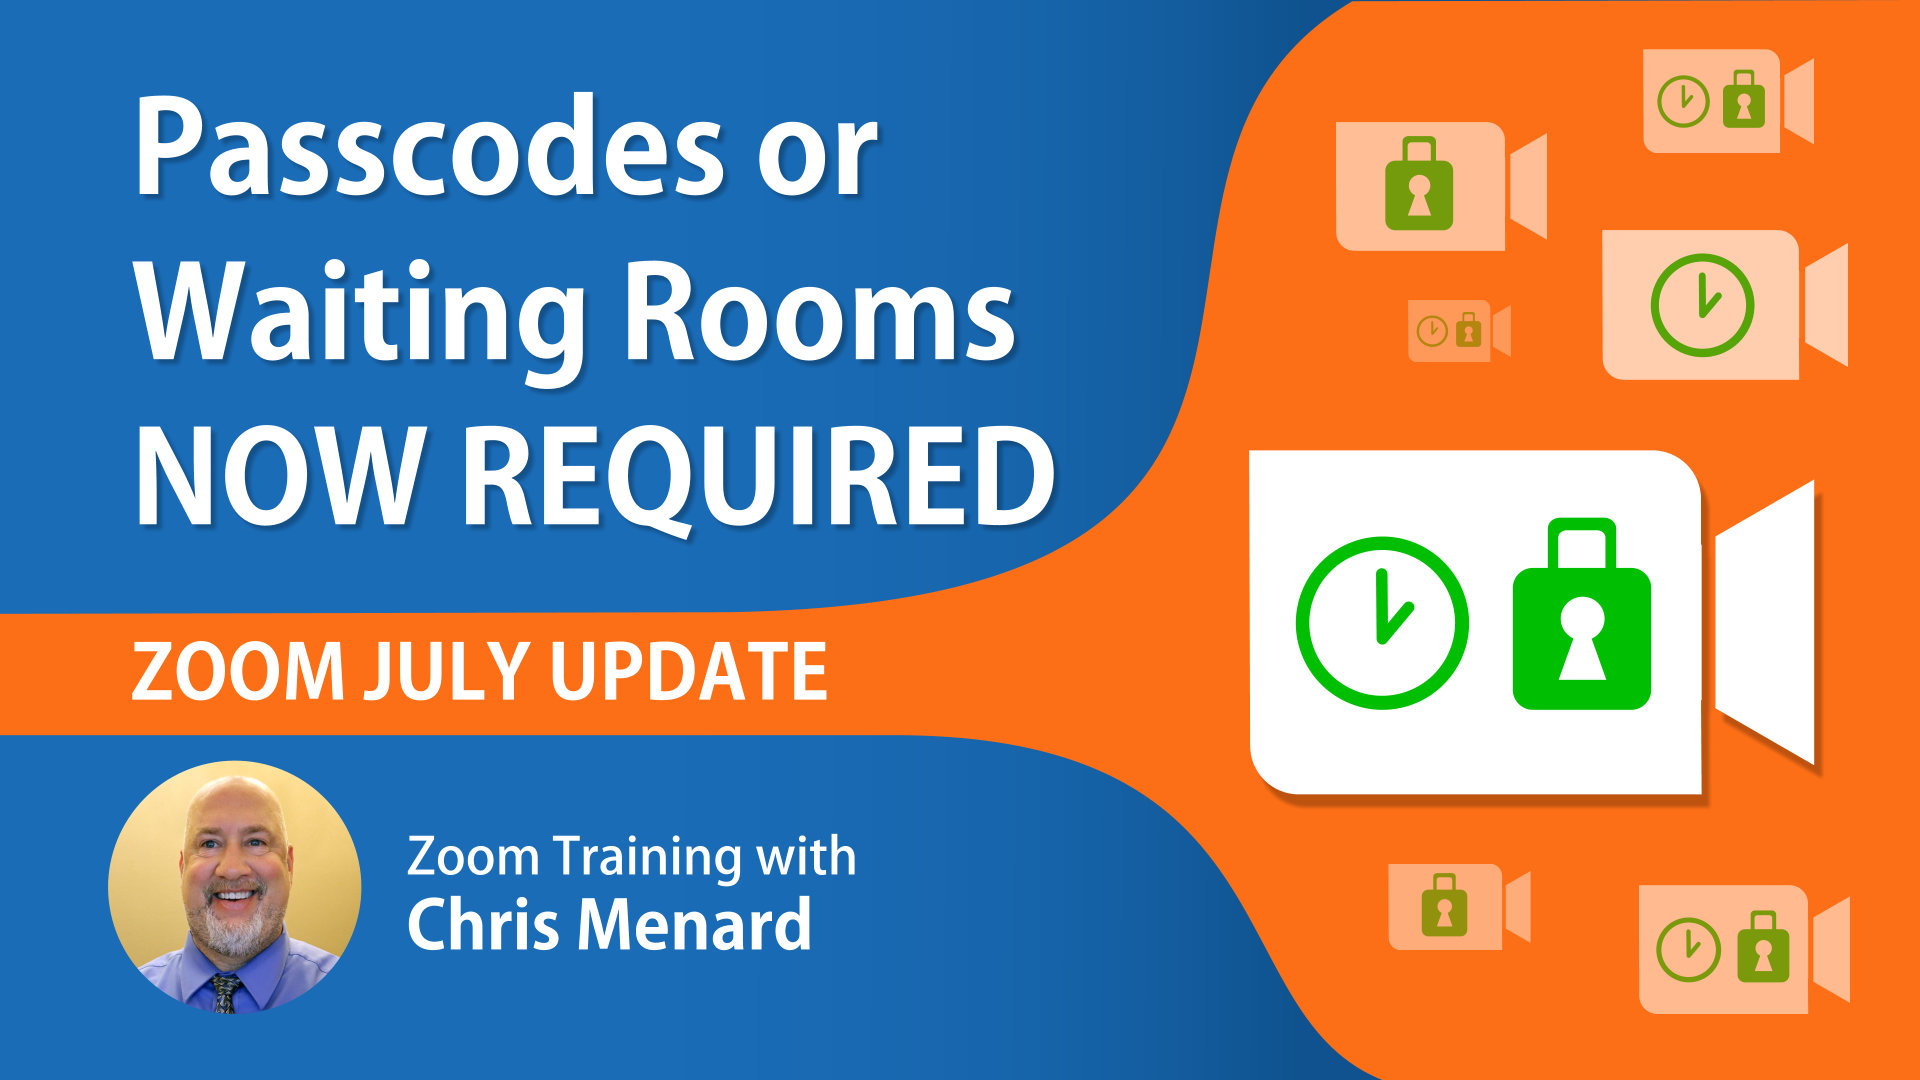 Zoom Passcodes will be required for all meetings or a Waiting Room enabled starting July 19th